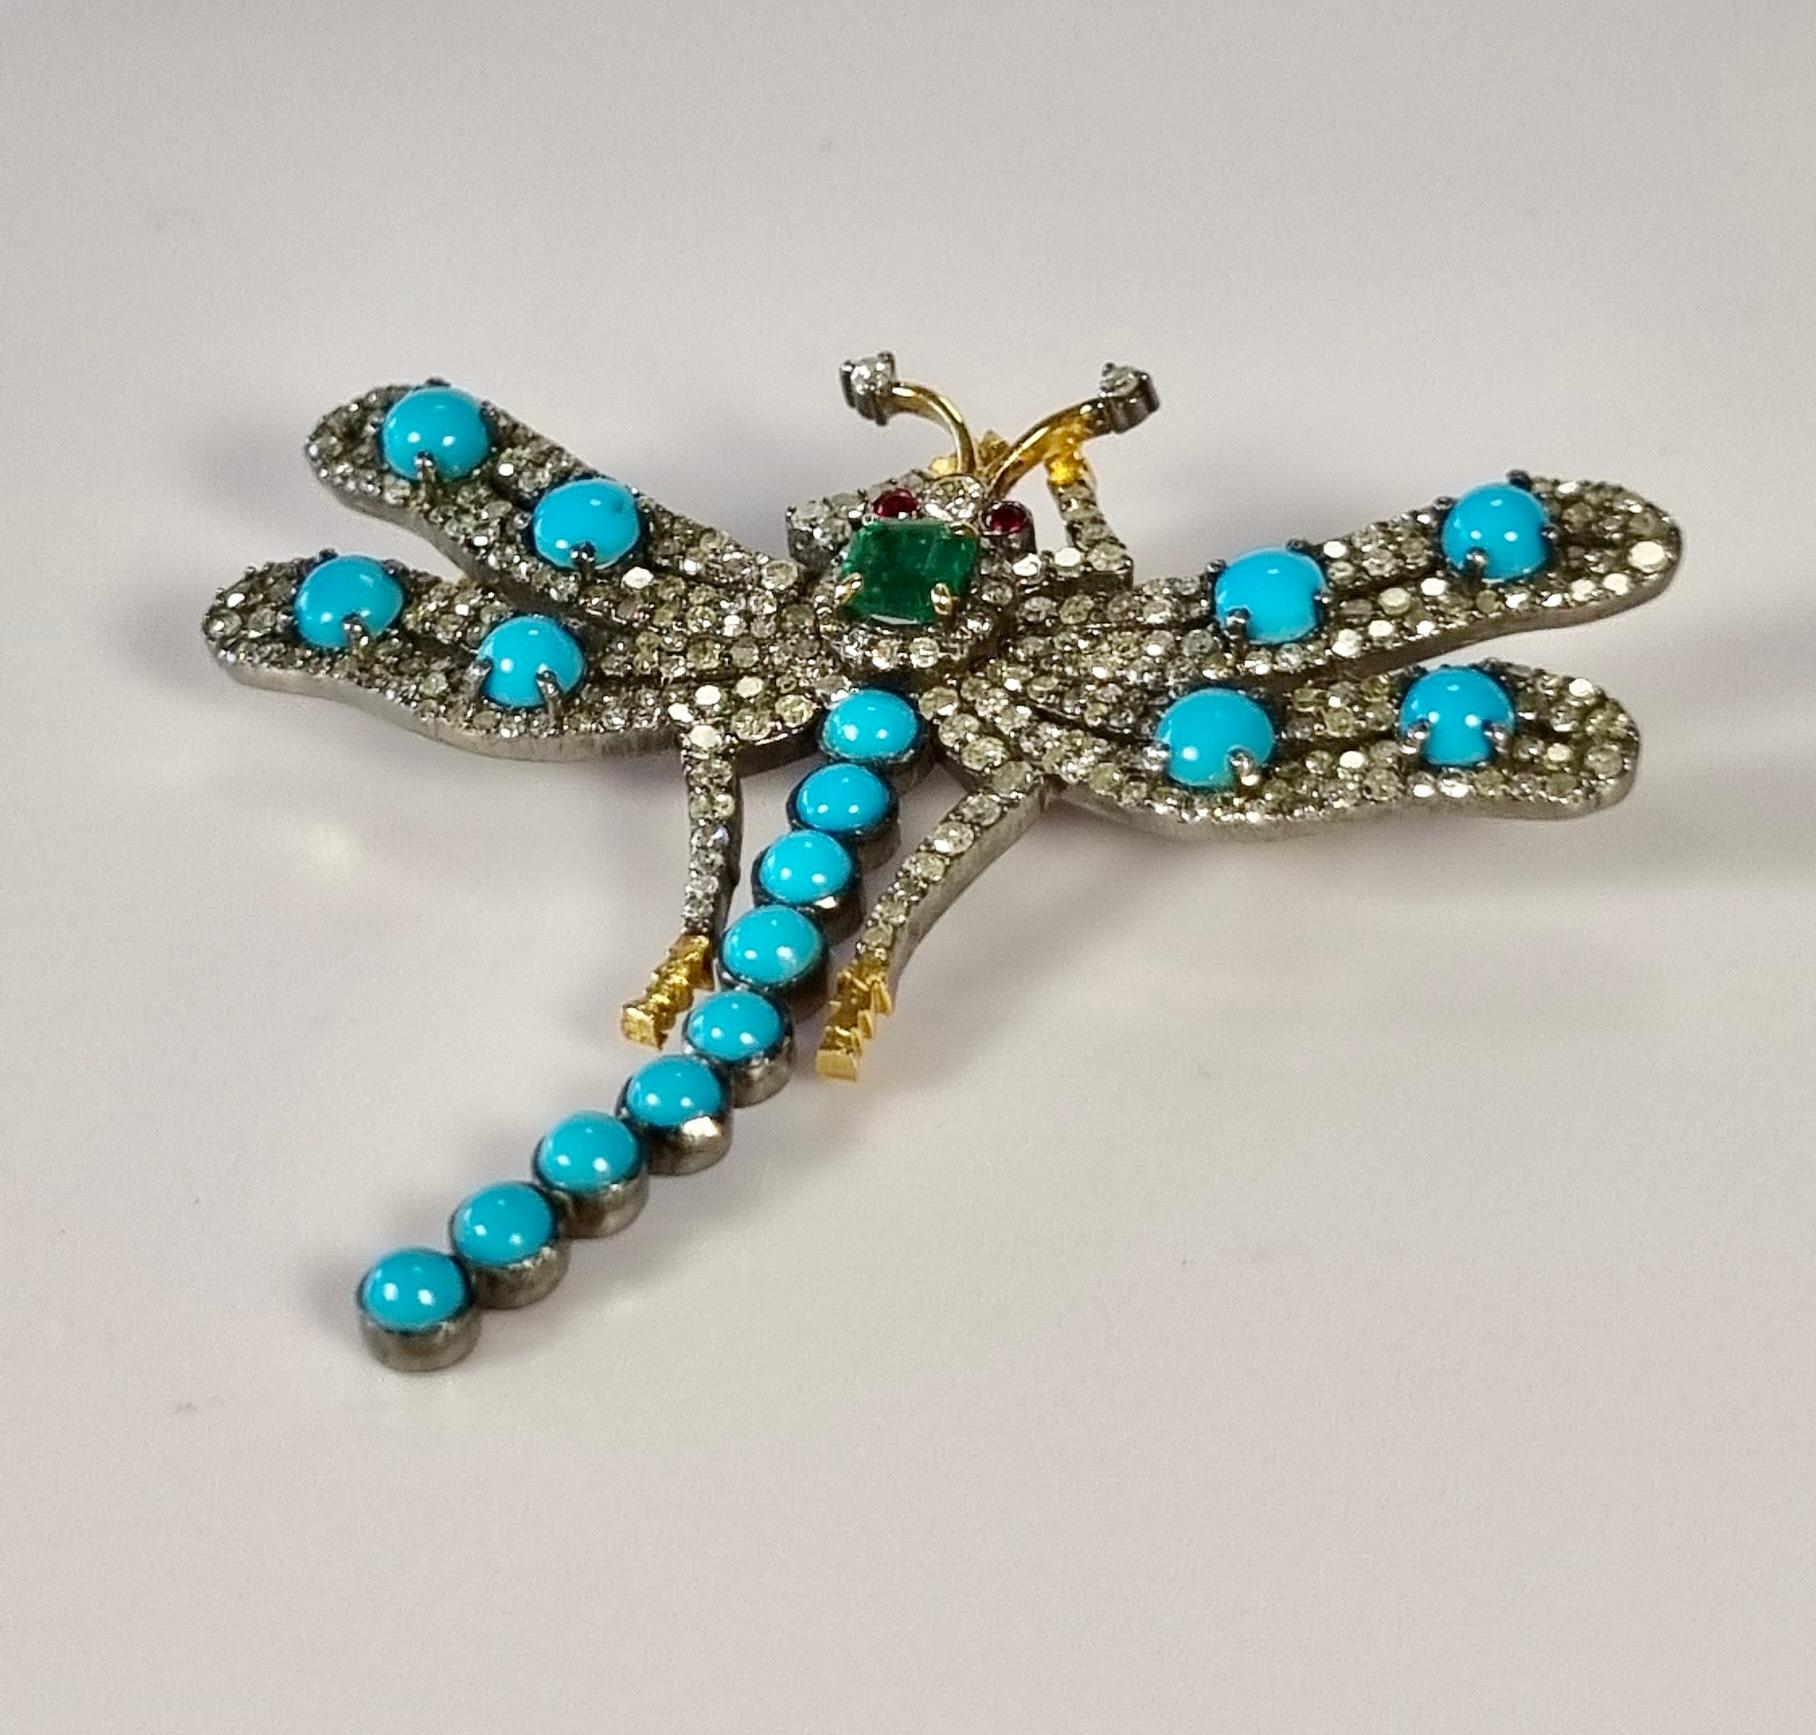 Torquoise Dragonfly   14k Gold and silver Brooche with Diamonds and Emerald
14k gold  2gr
Silver 10.08gr
Diamonds 2.56ct. 
Emerald 0.29ct
Rubies 0.02ct
Turquoise 2.43ct 

READY TO SHIP
*Shipment of this piece is not affected by COVID-19. Orders